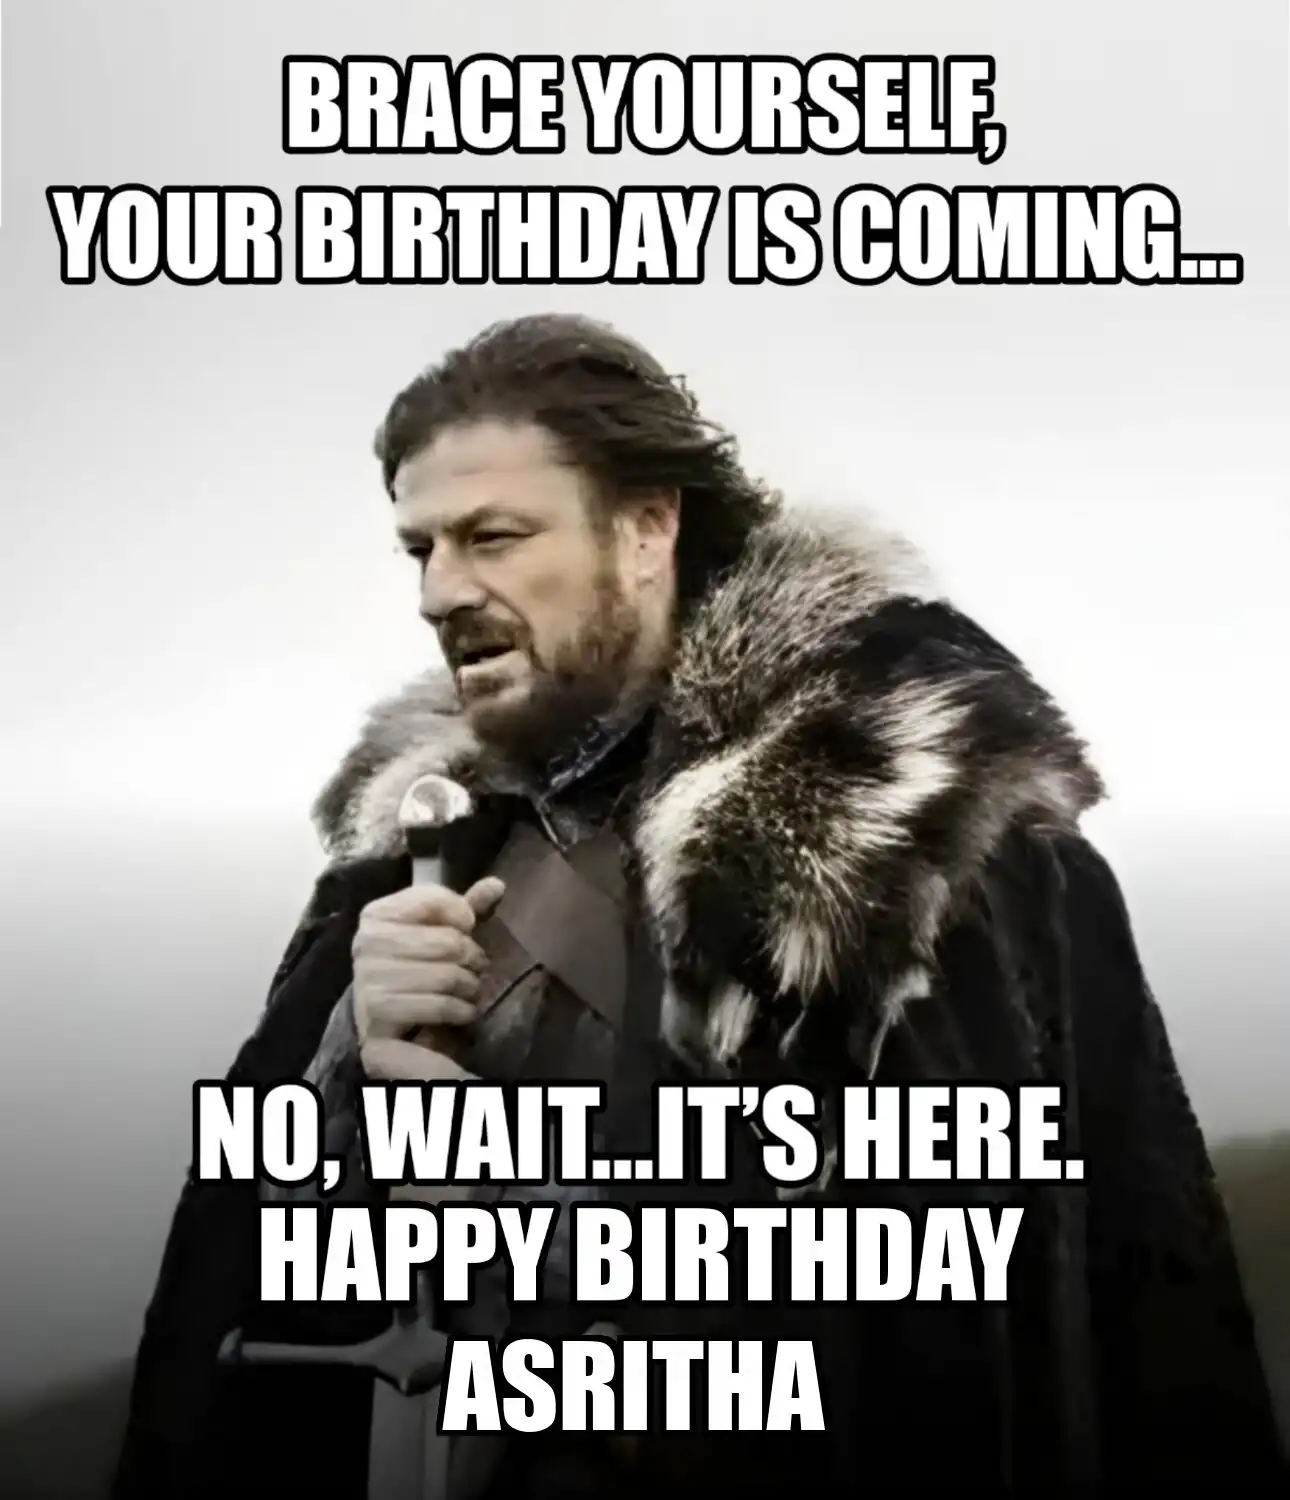 Happy Birthday Asritha Brace Yourself Your Birthday Is Coming Meme